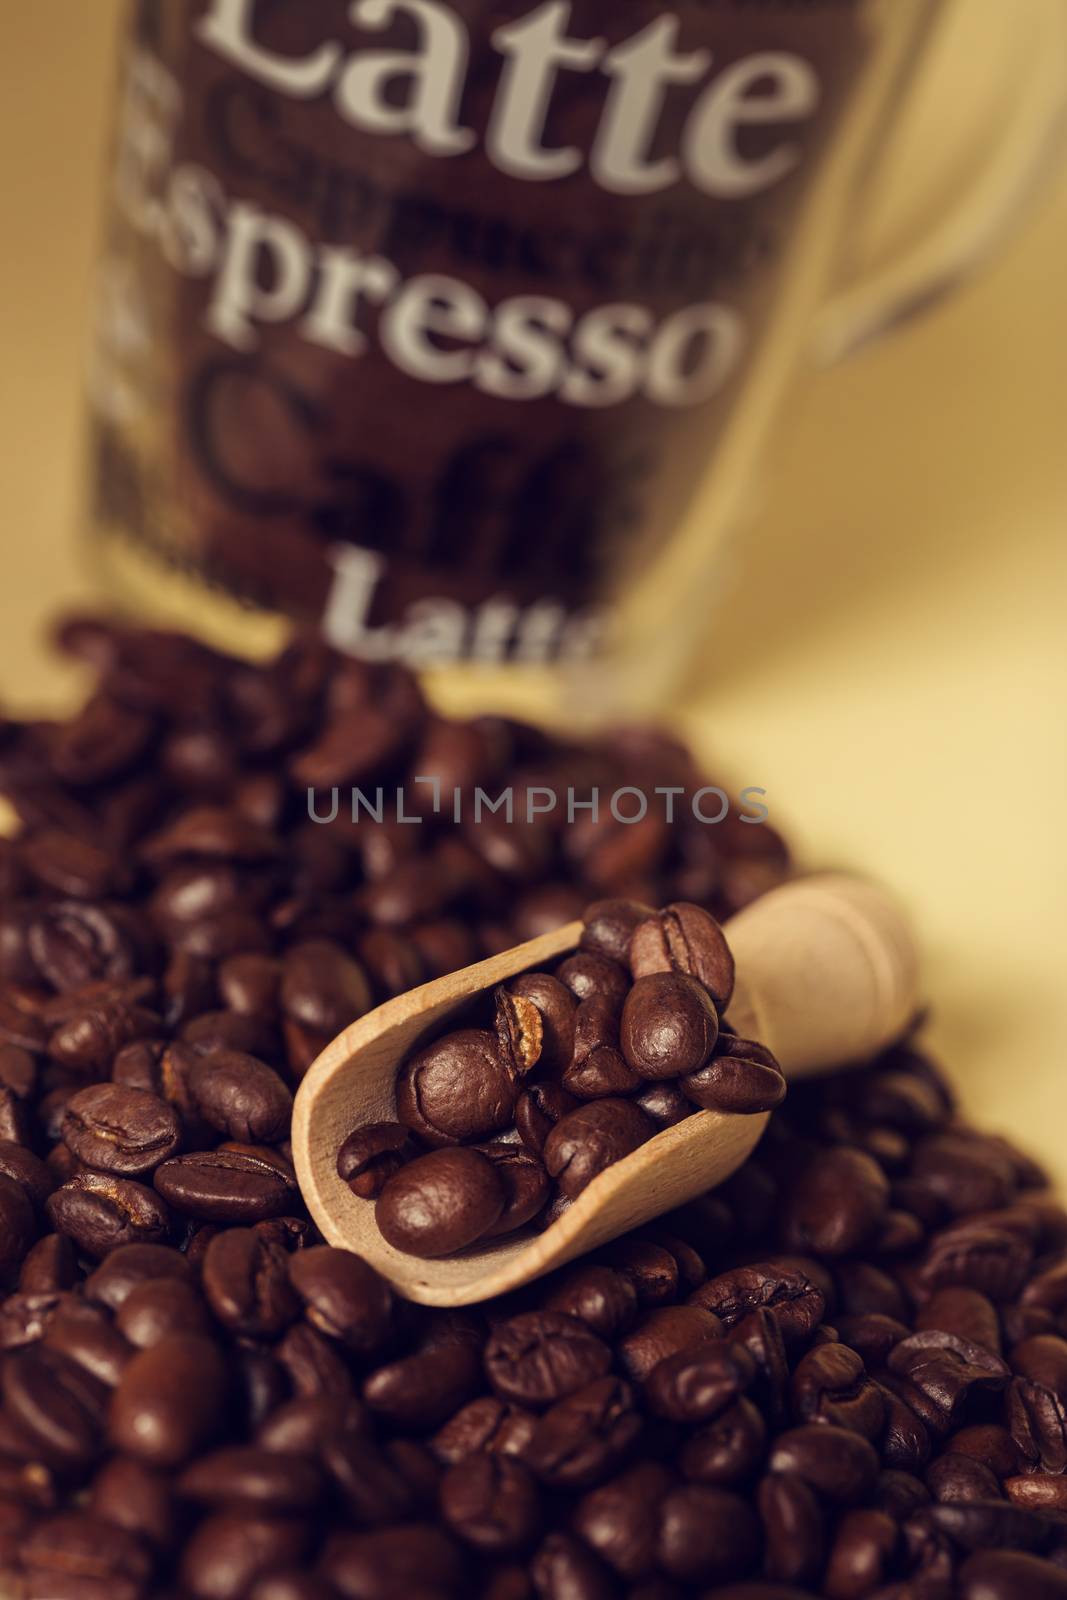 Coffee beans with small measuring spoon made of wood